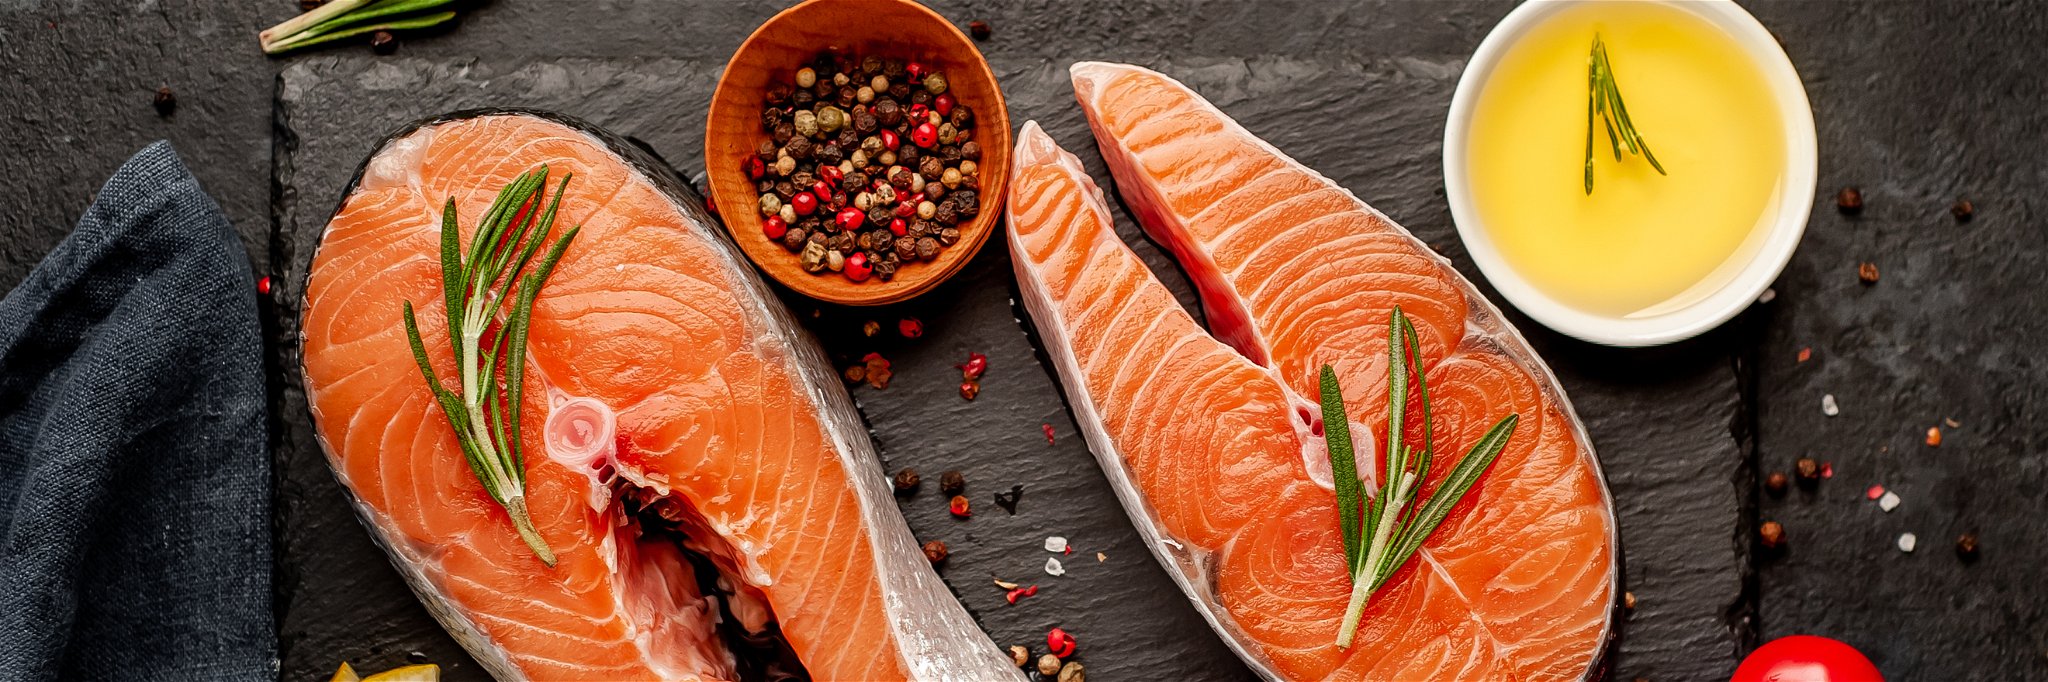 The 7 Best Wine Pairings for Salmon